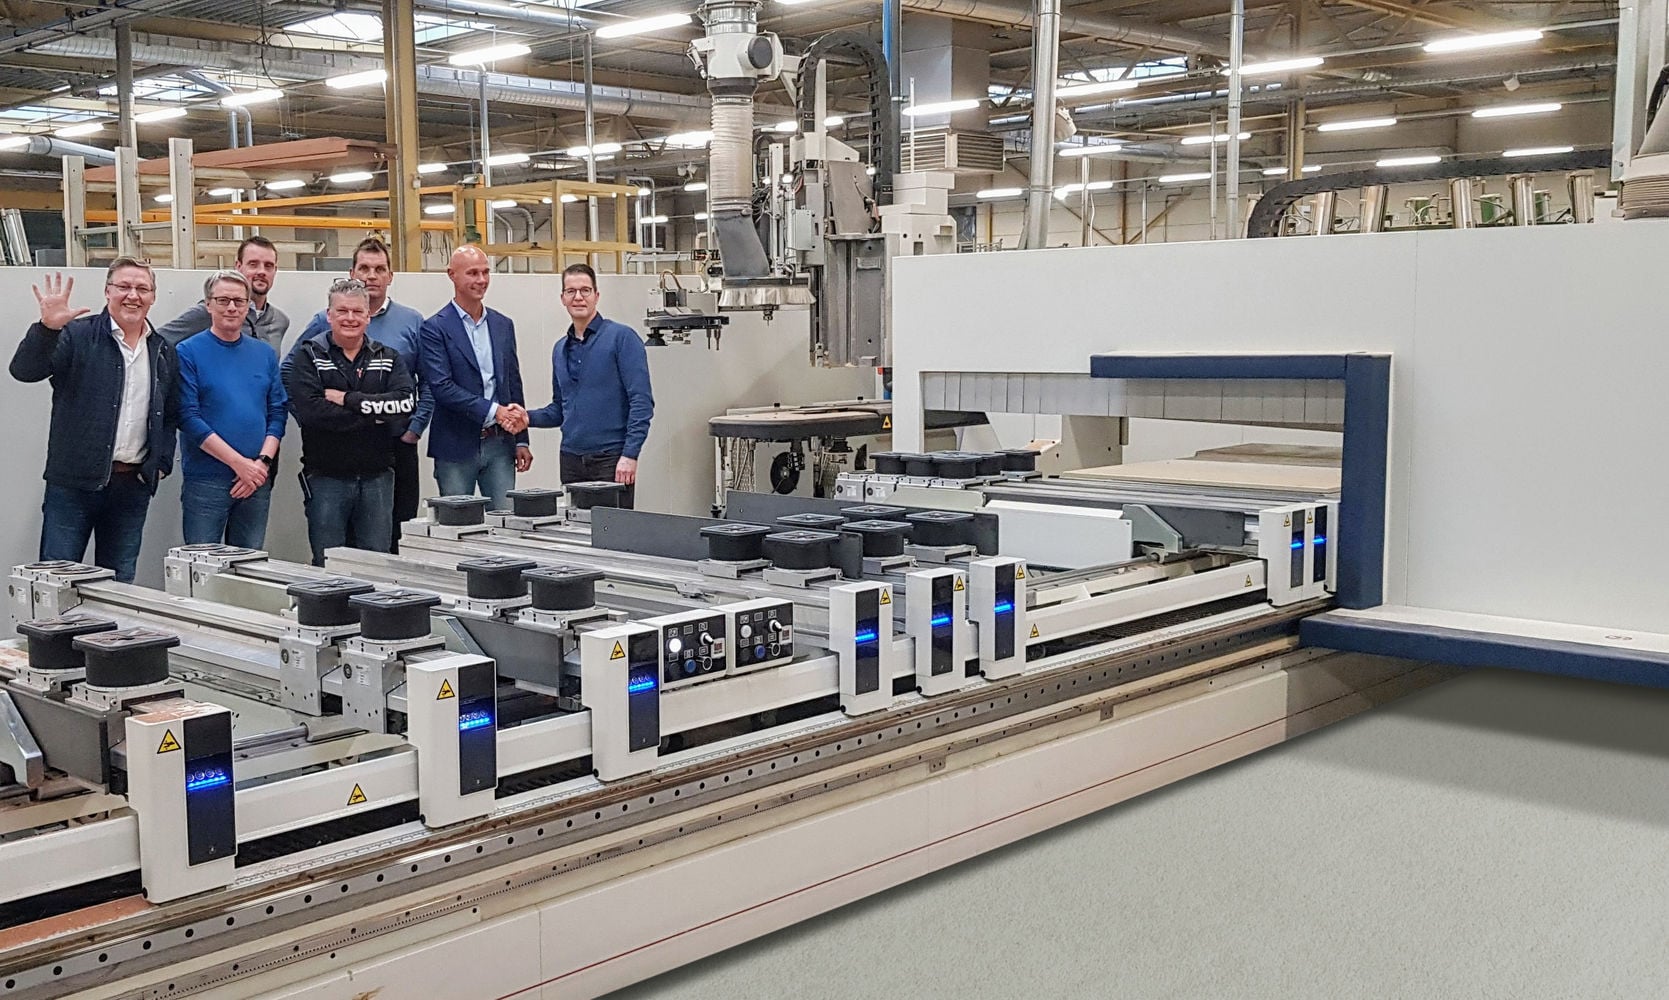 Vermeulen trappen B.V., ordered 4 machines ACCORD 42 FX-MATIC with 2 independent 5-axis units